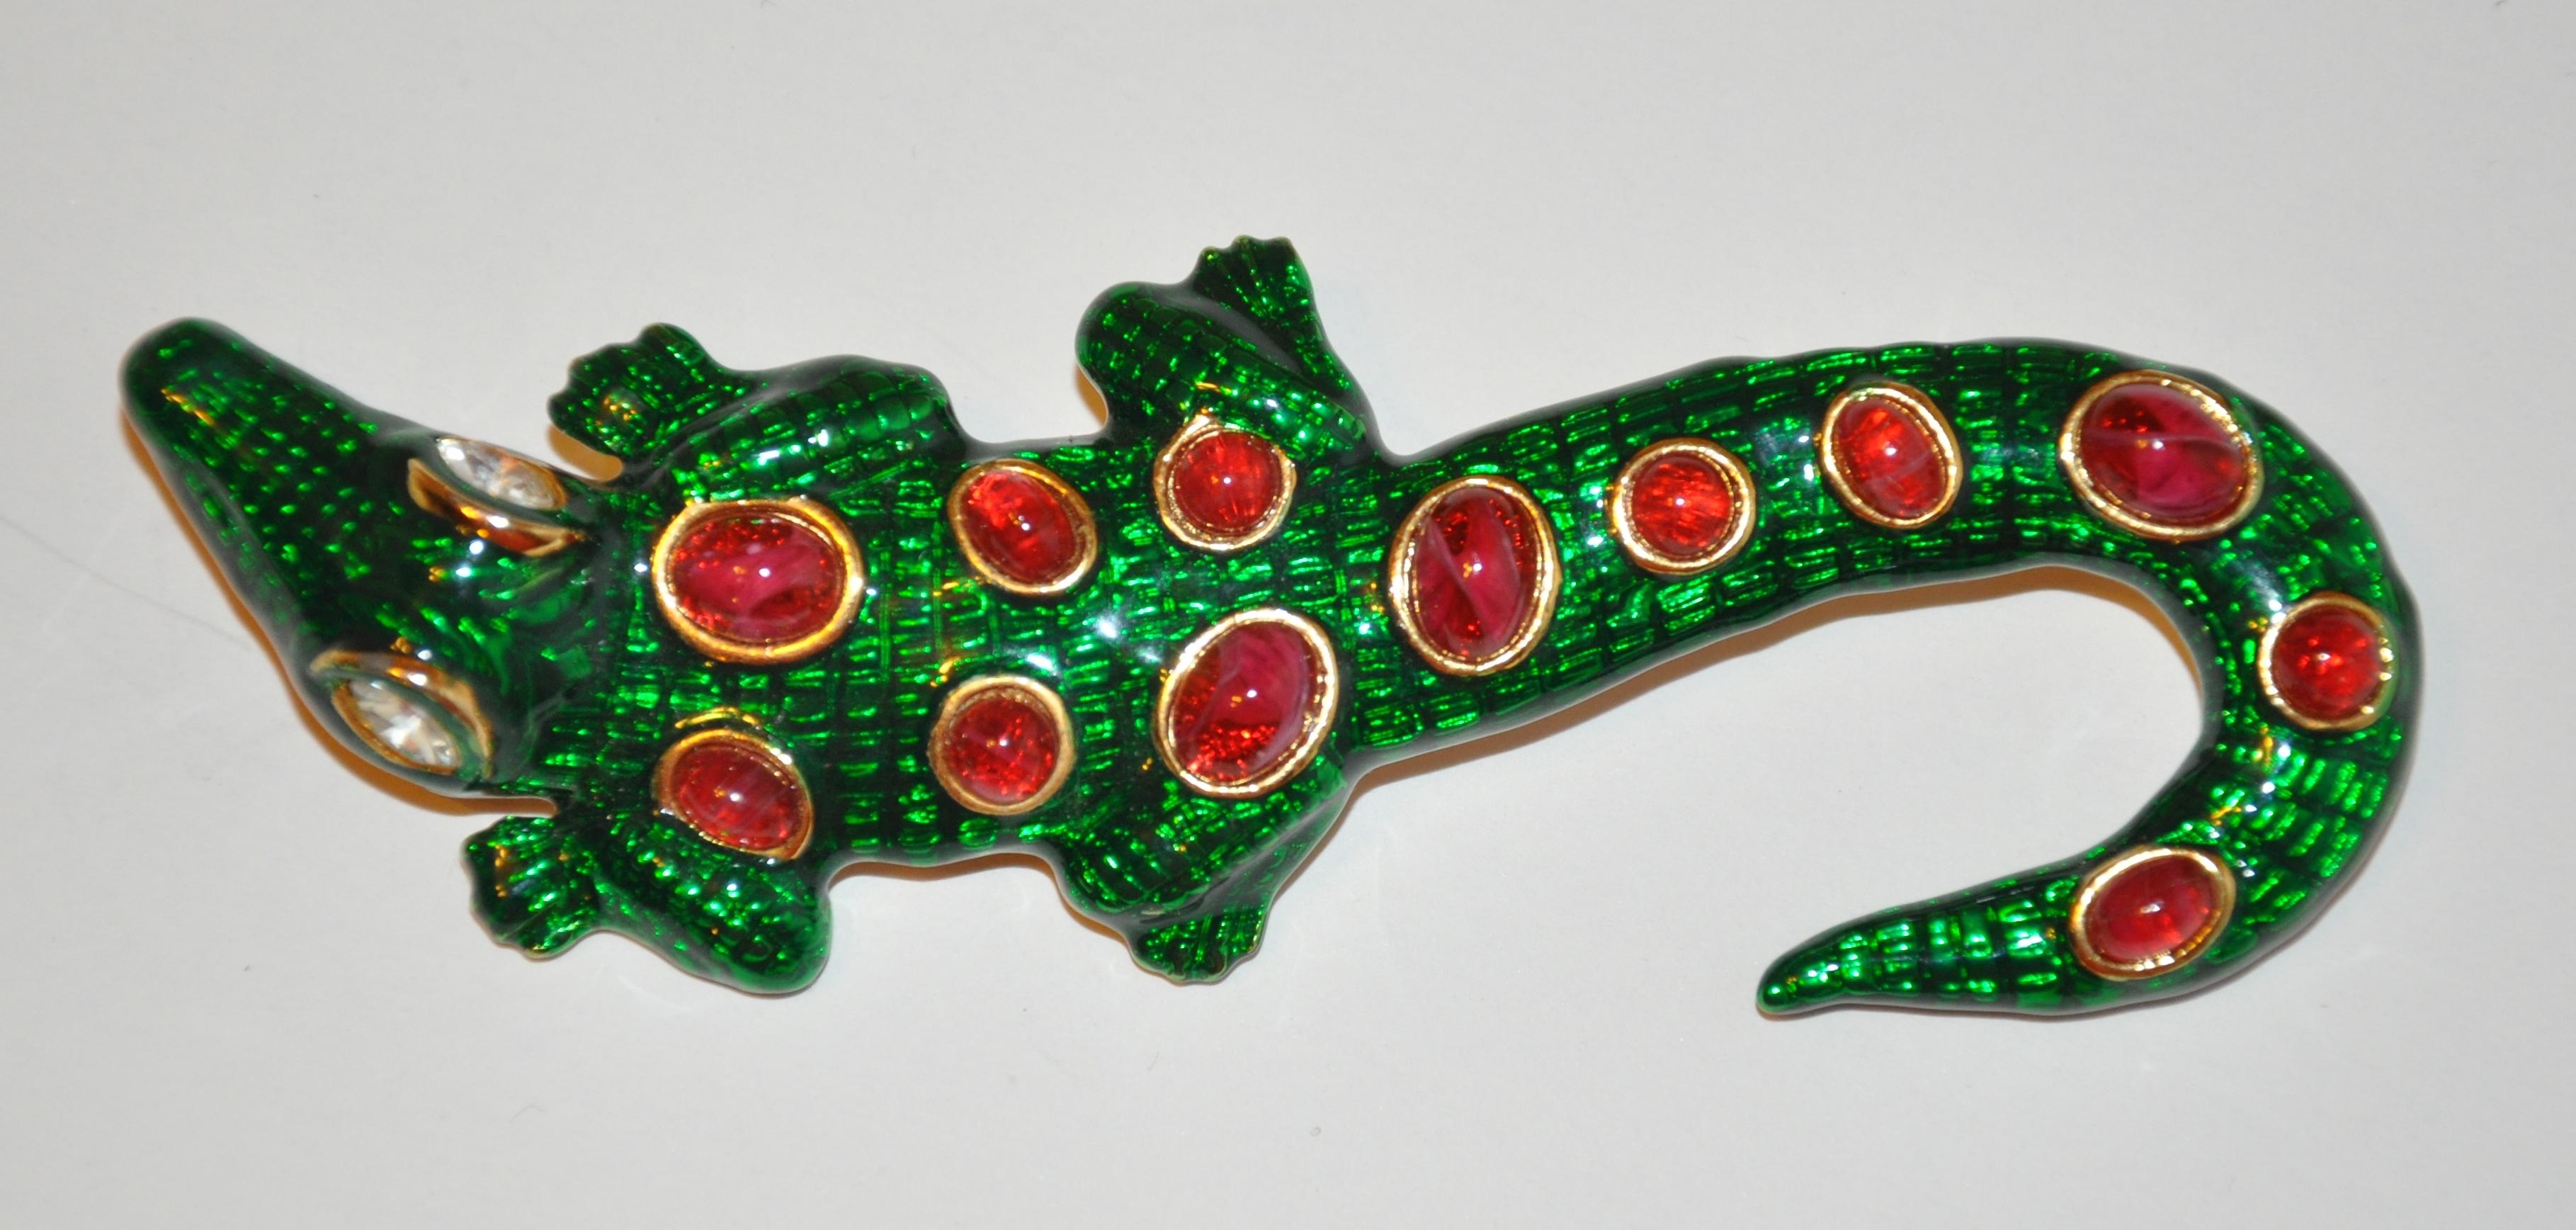 Artisan Kenneth Lane Whimsical Green Enamel with Ruby-Like Accent 